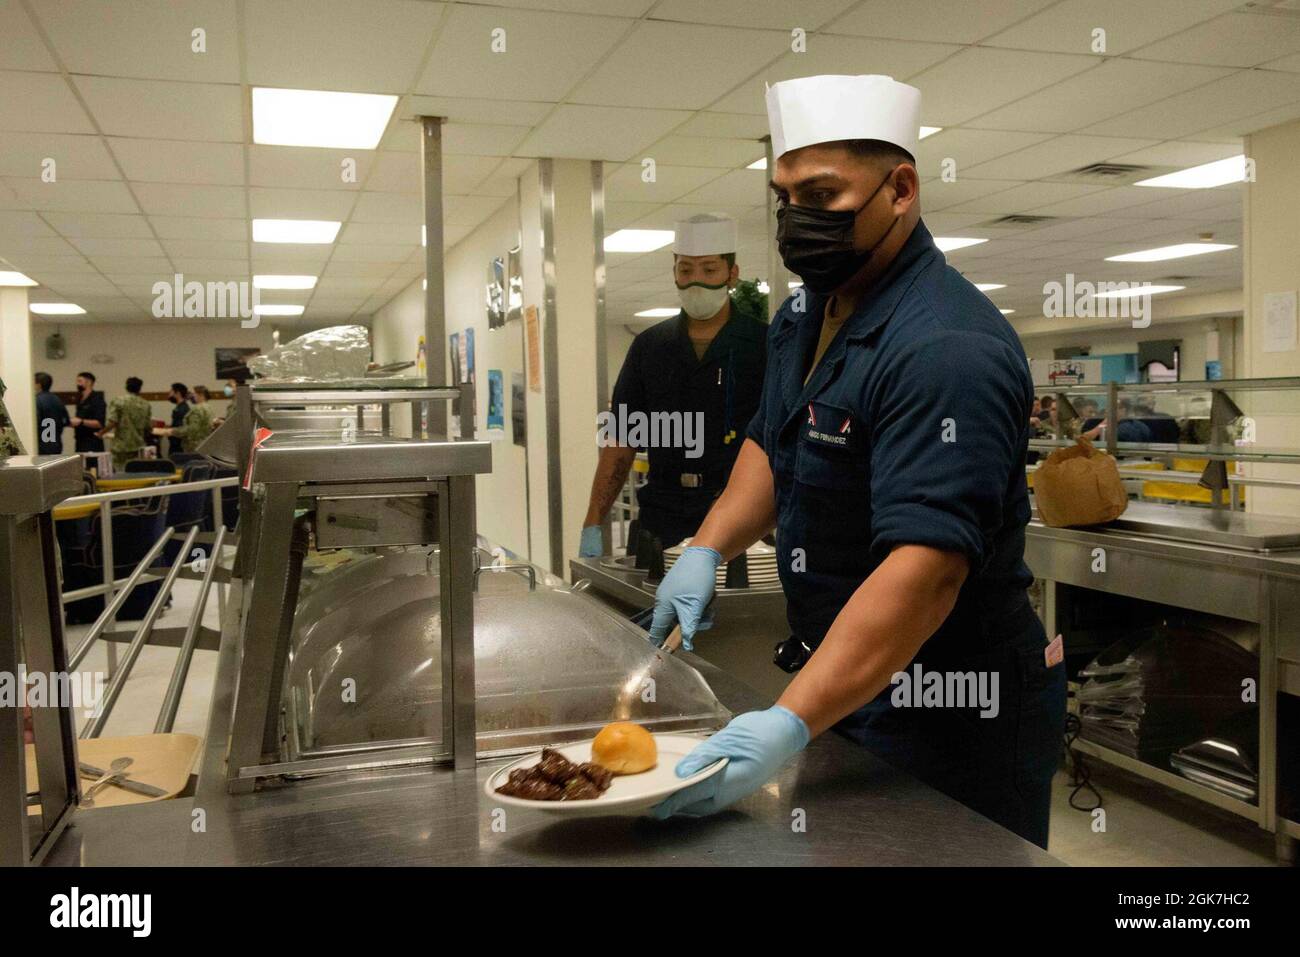 U.S. Navy Culinary Specialist Seaman Apprentice Amado Fernandez from Fresno, California, serves the special Women’s Equality Day meal on board the Floating Accommodation Facility attached to the aircraft carrier USS John C. Stennis (CVN 74), in Newport News, Virginia, Aug. 26, 2021. John C. Stennis is in Newport News Shipyard working alongside NNS, NAVSEA and contractors conducting Refueling and Complex Overhaul as part of the mission to deliver the warship back in the fight, on time and on budget, to resume its duty of defending the United States. Stock Photo